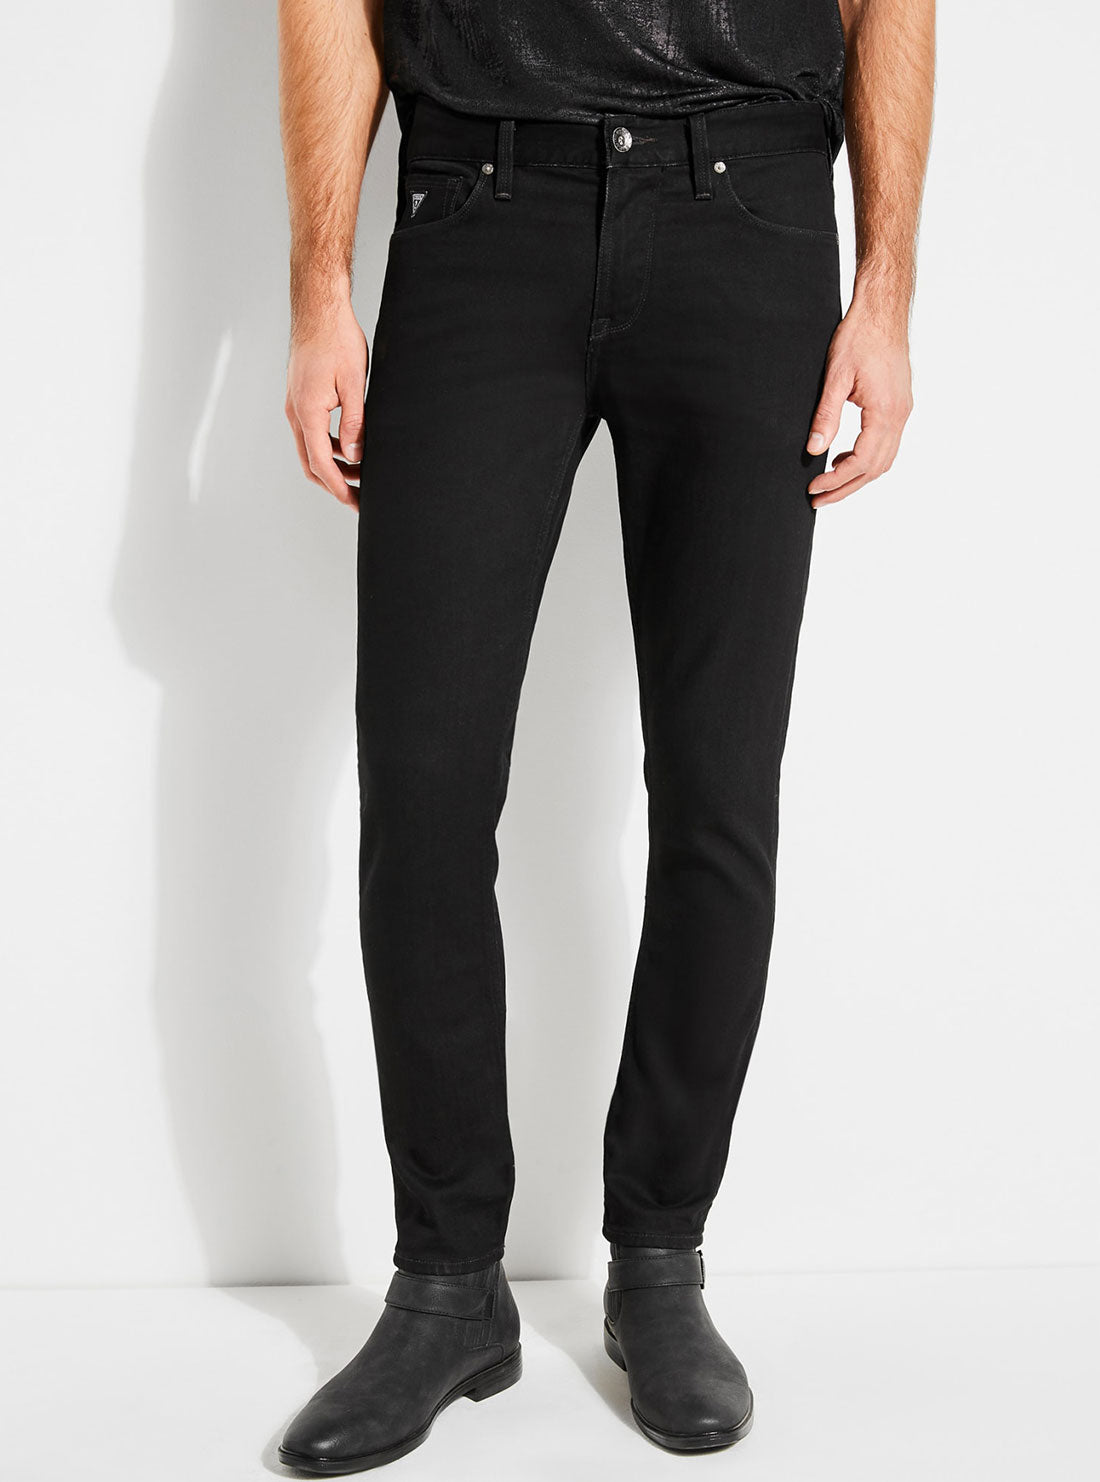 GUESS Black Straight Denim Pants front view